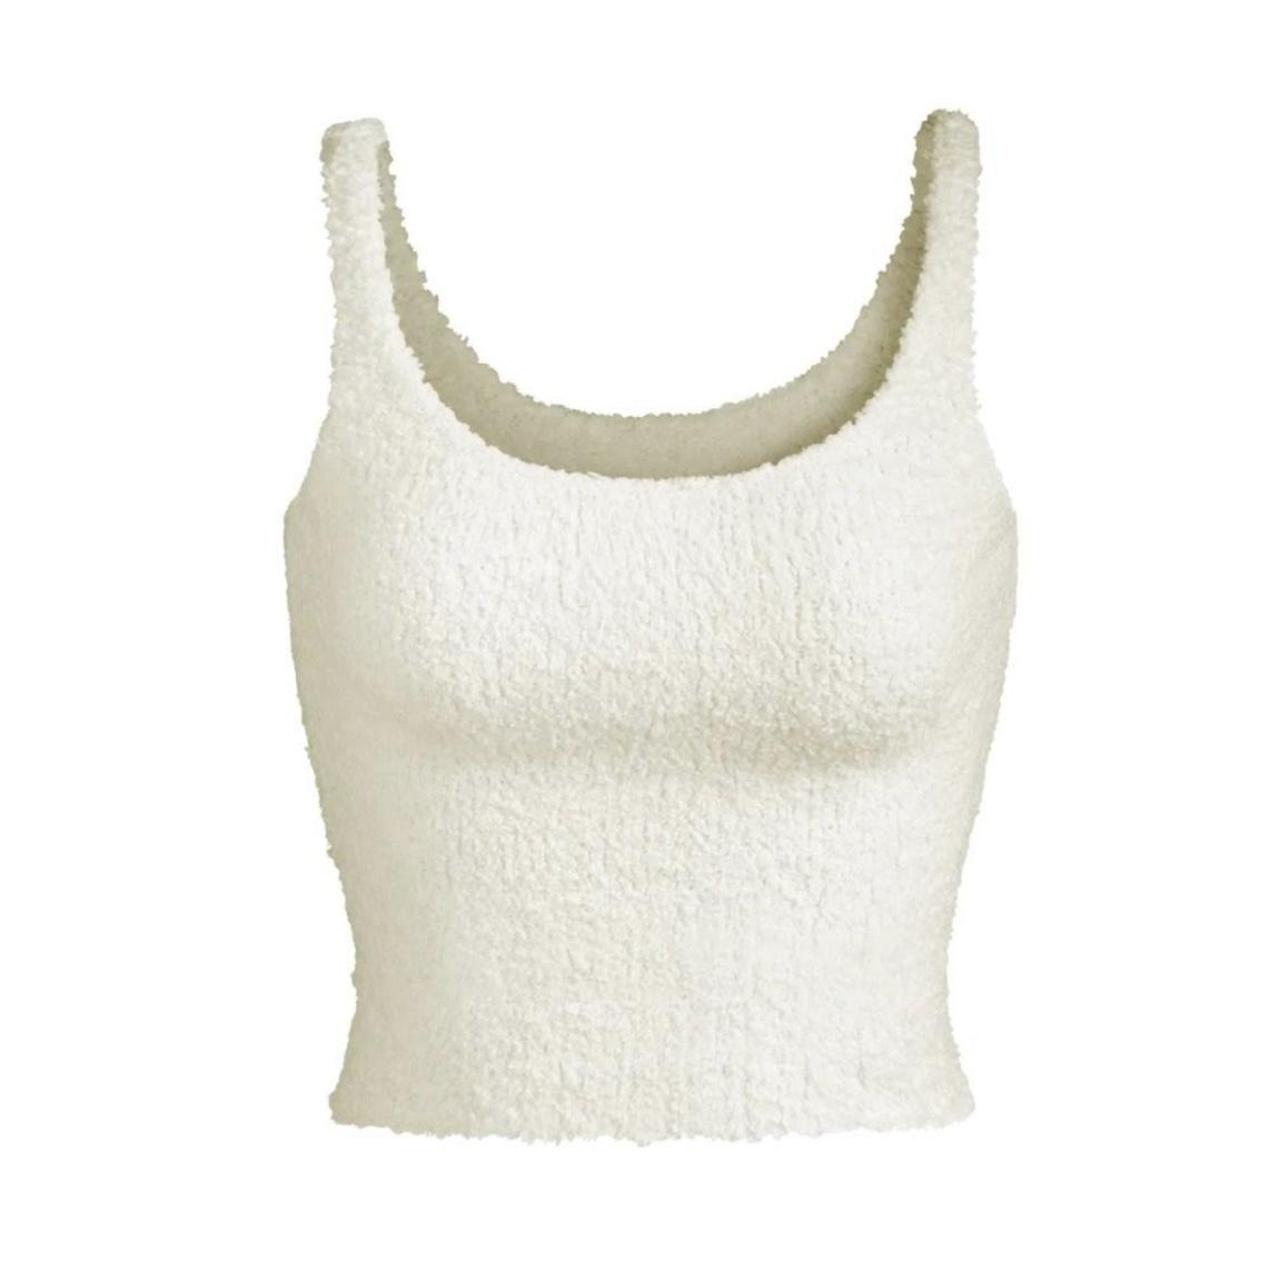 skims cozy knit tank top in white, size s/m, - I’m